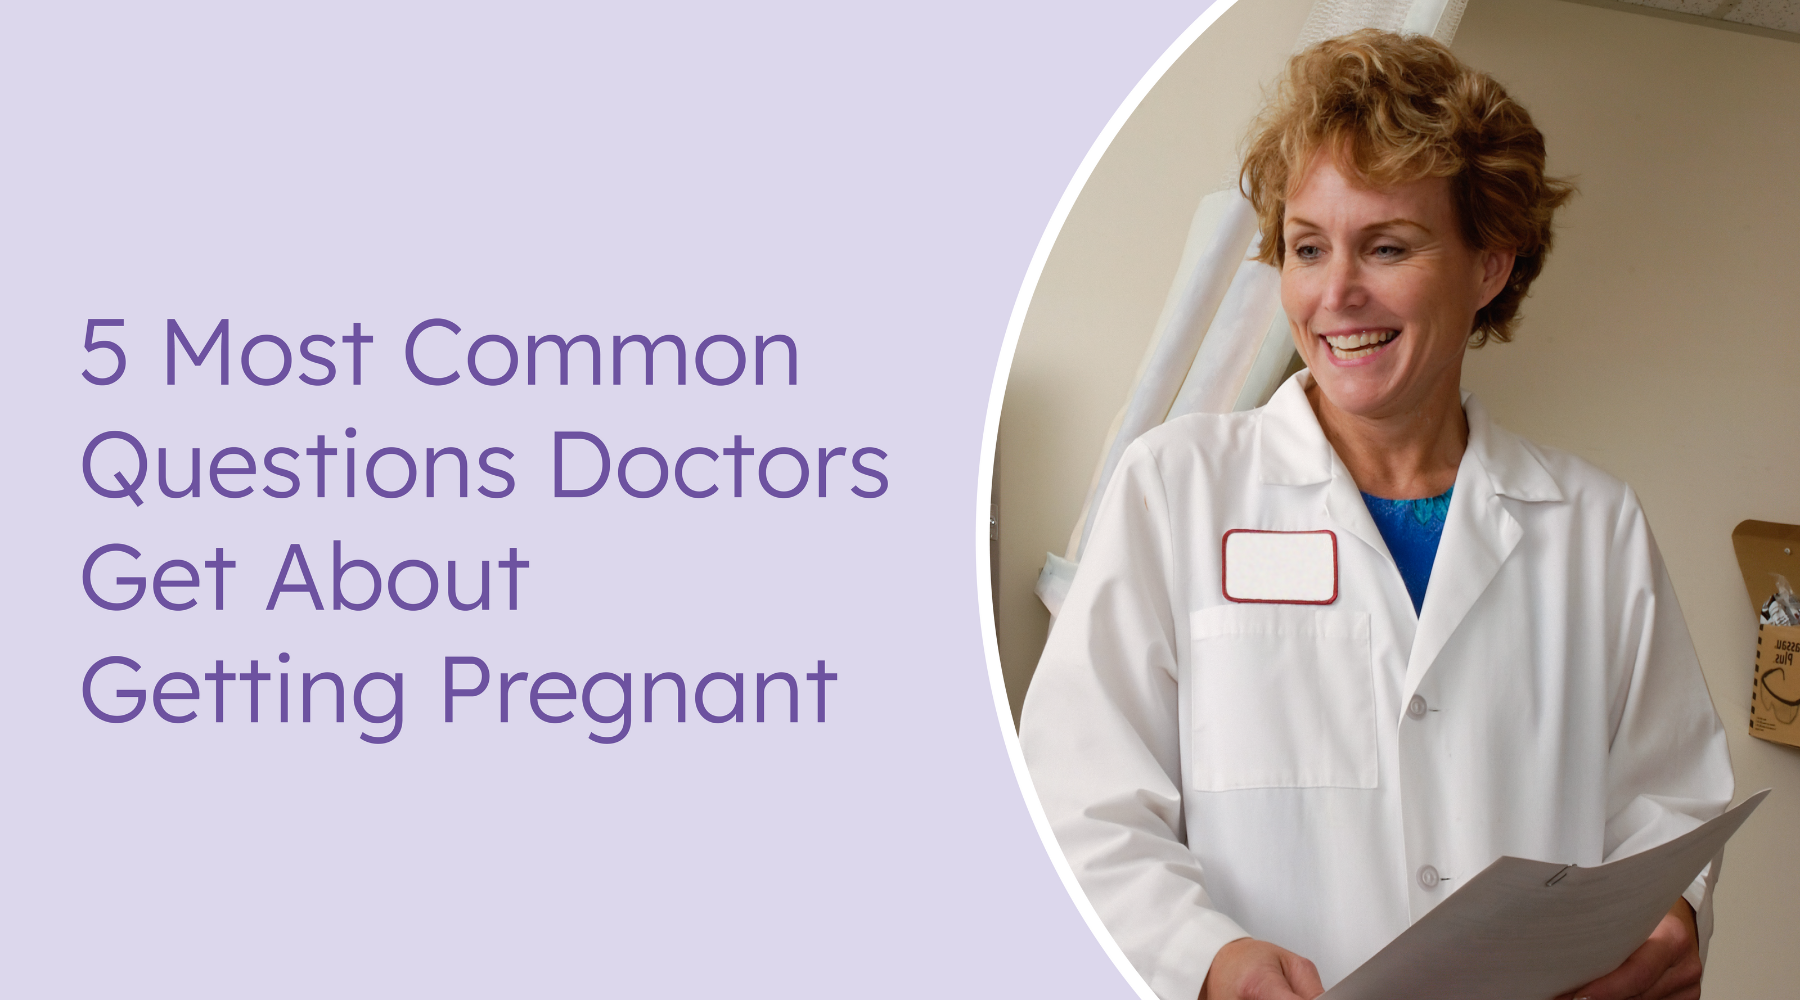 5 most common questions doctors get about getting pregnant